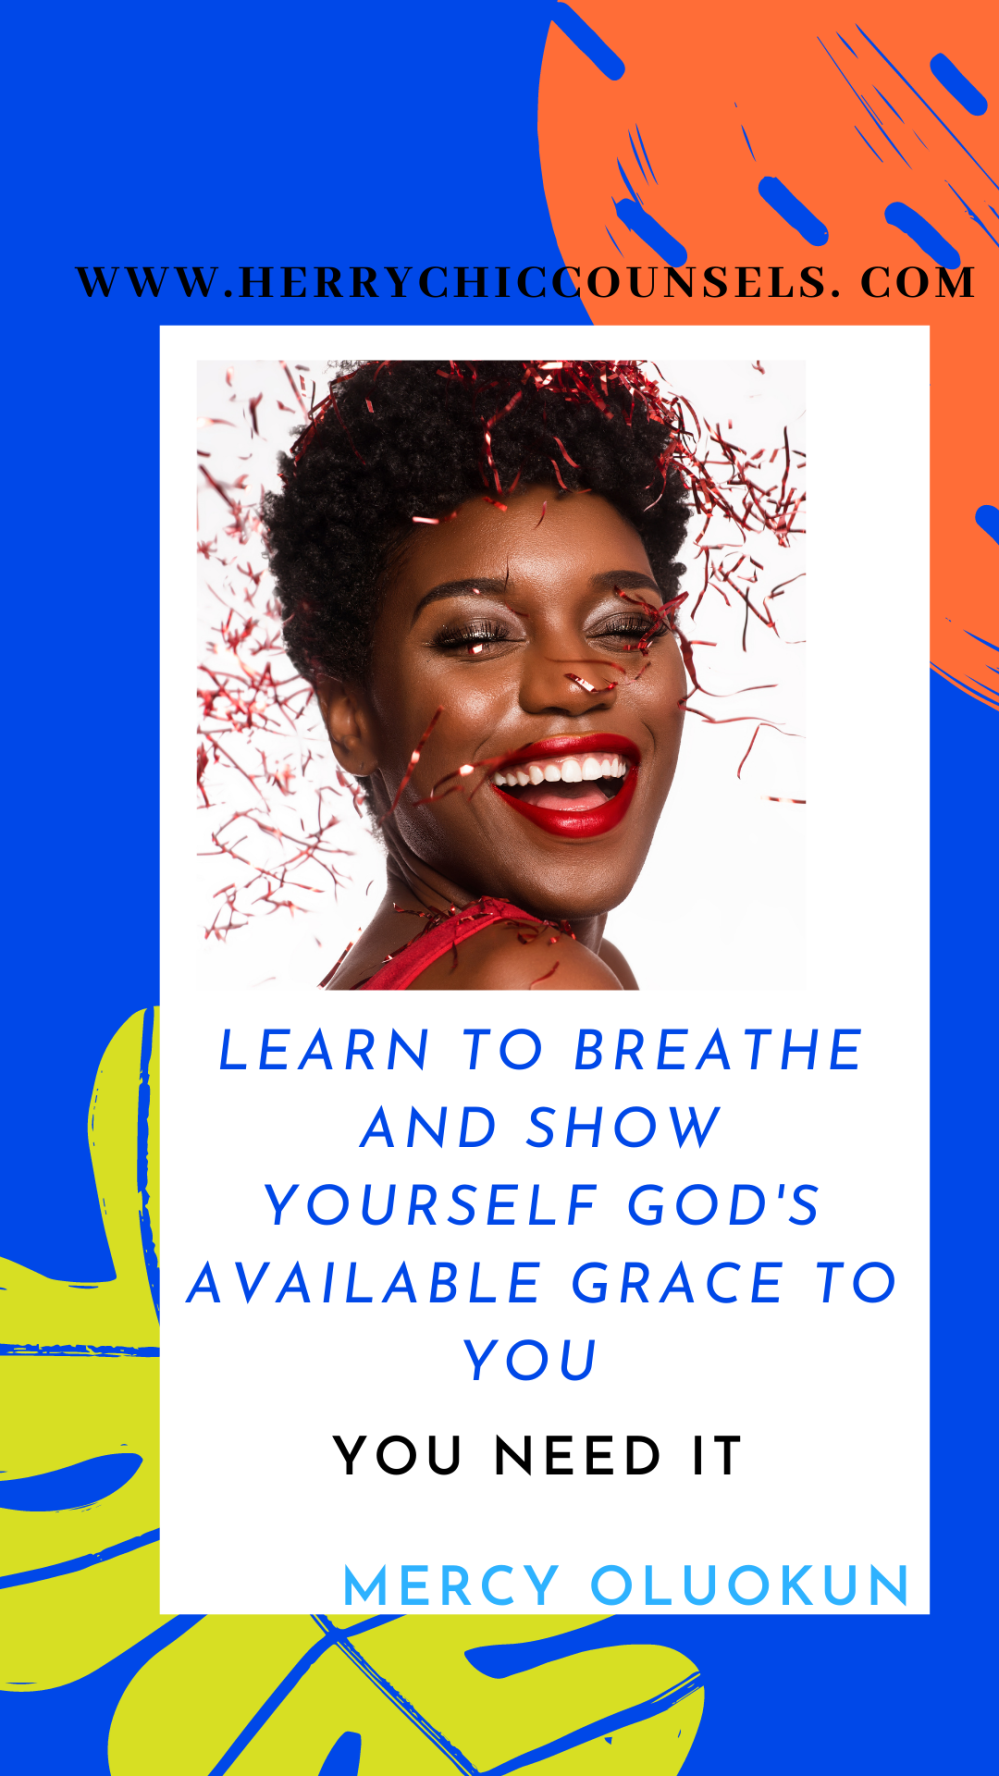 Breathe - Show yourself grace - need